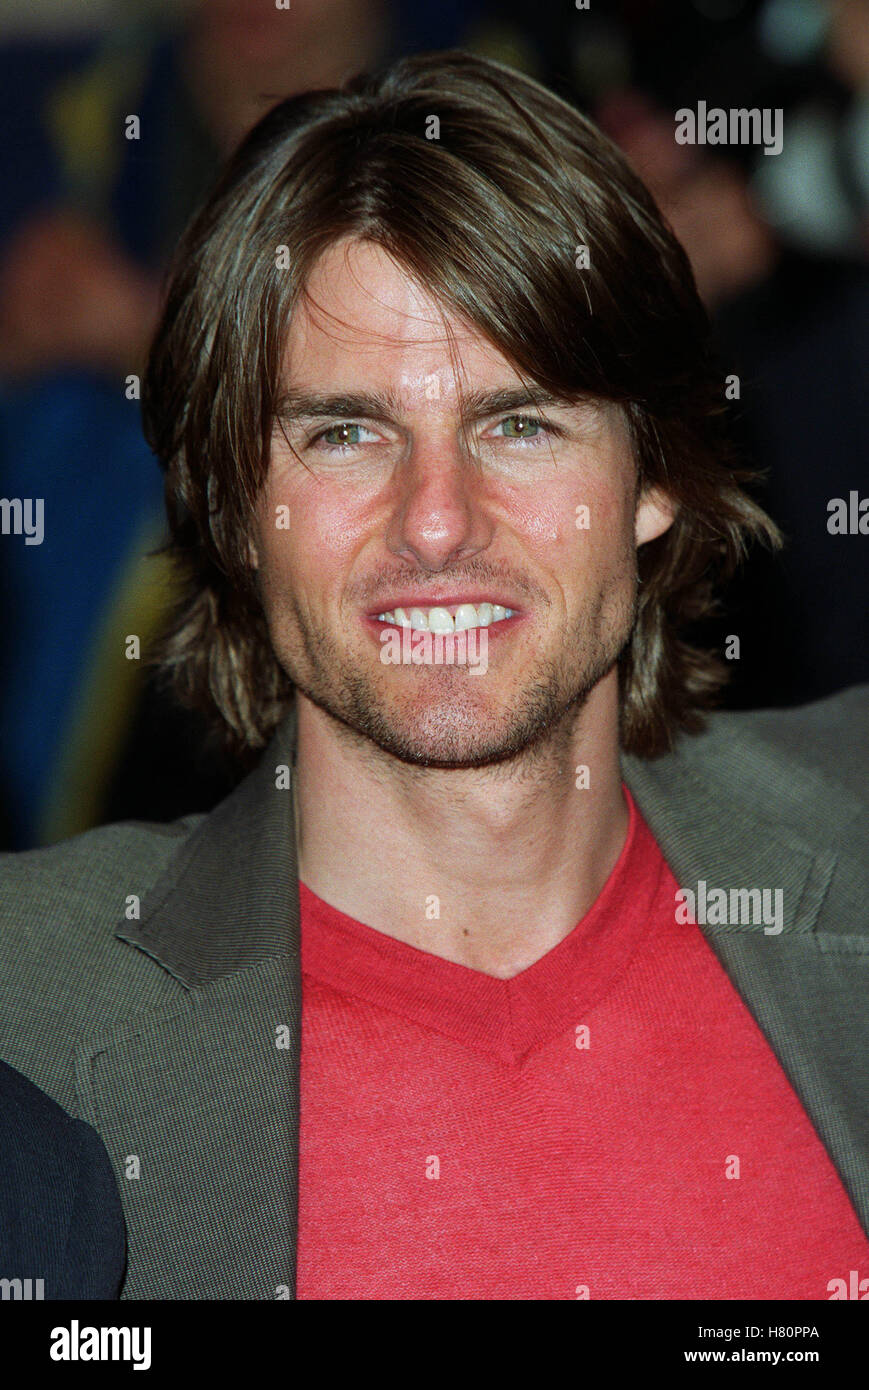 TOM CRUISE MISSION IMPOSSIBLE 2 PREMIER LONDON/ANGLETERRE LEICESTER SQ 04 Juillet 2000 Banque D'Images